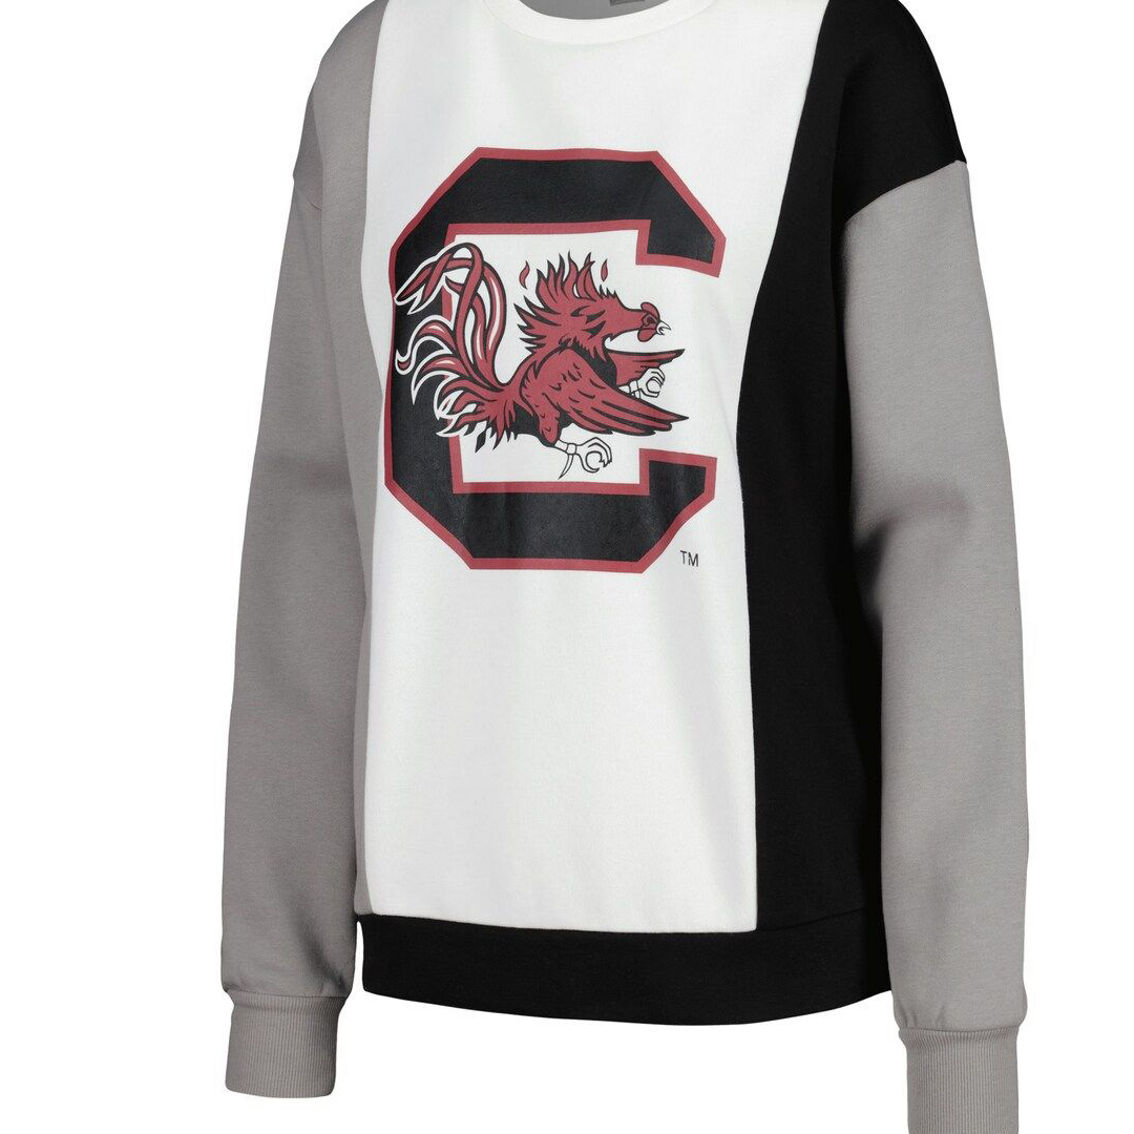 Gameday Couture Women's White/Black South Carolina Gamecocks Vertical Color-Block Pullover Sweatshirt - Image 3 of 4